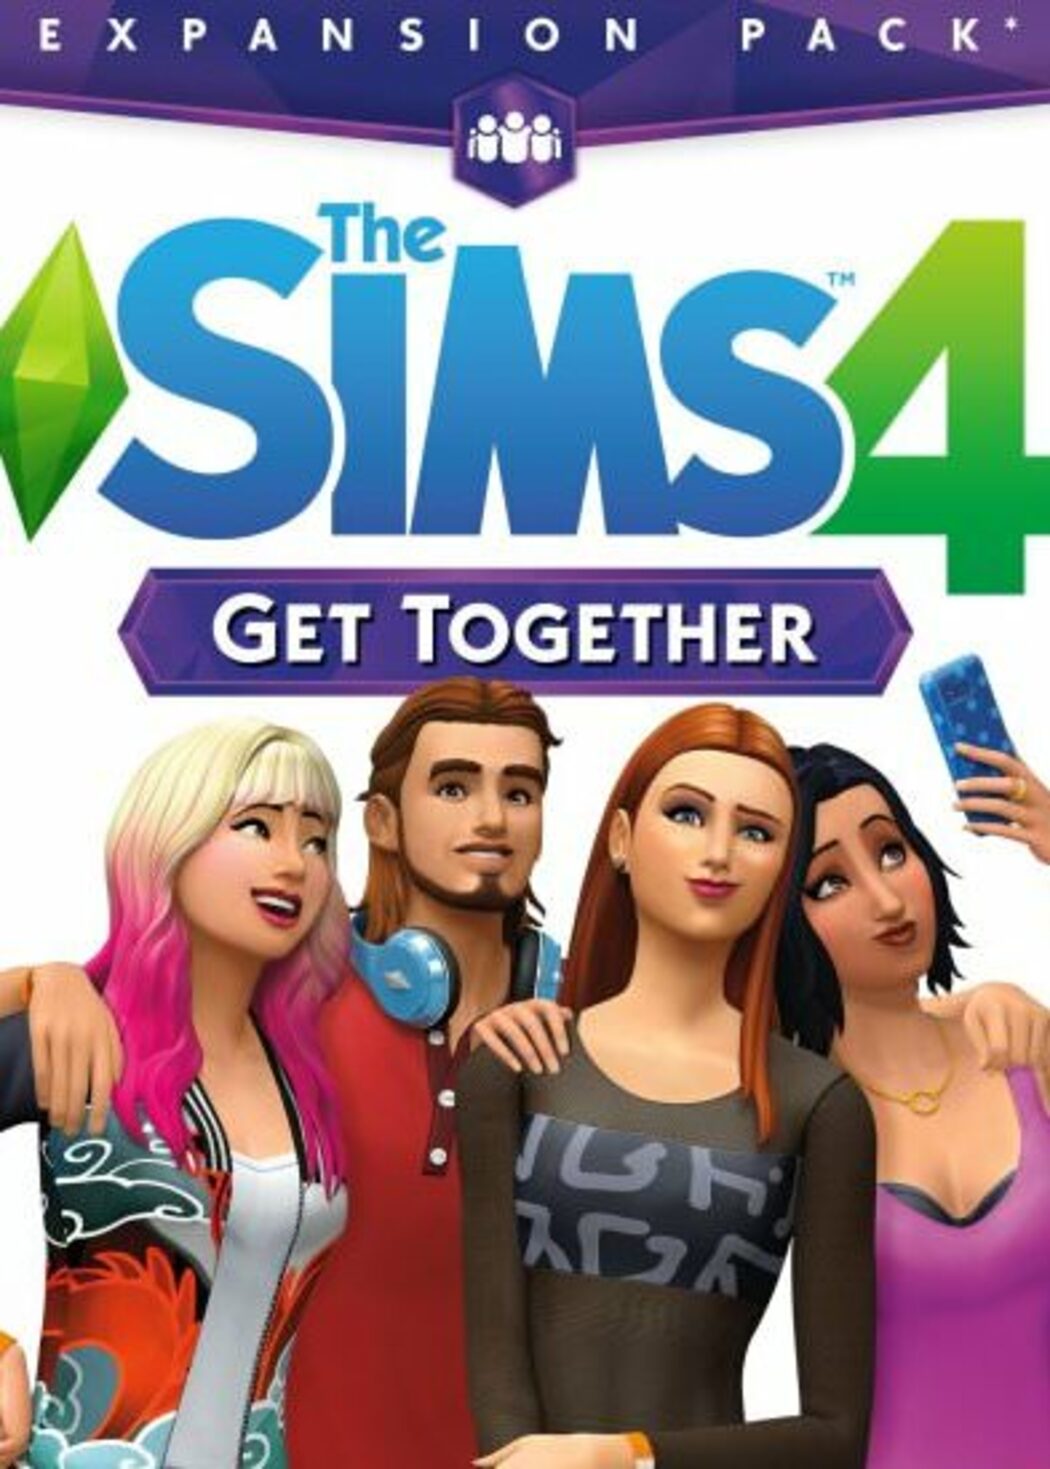 sims 4 get together coupon